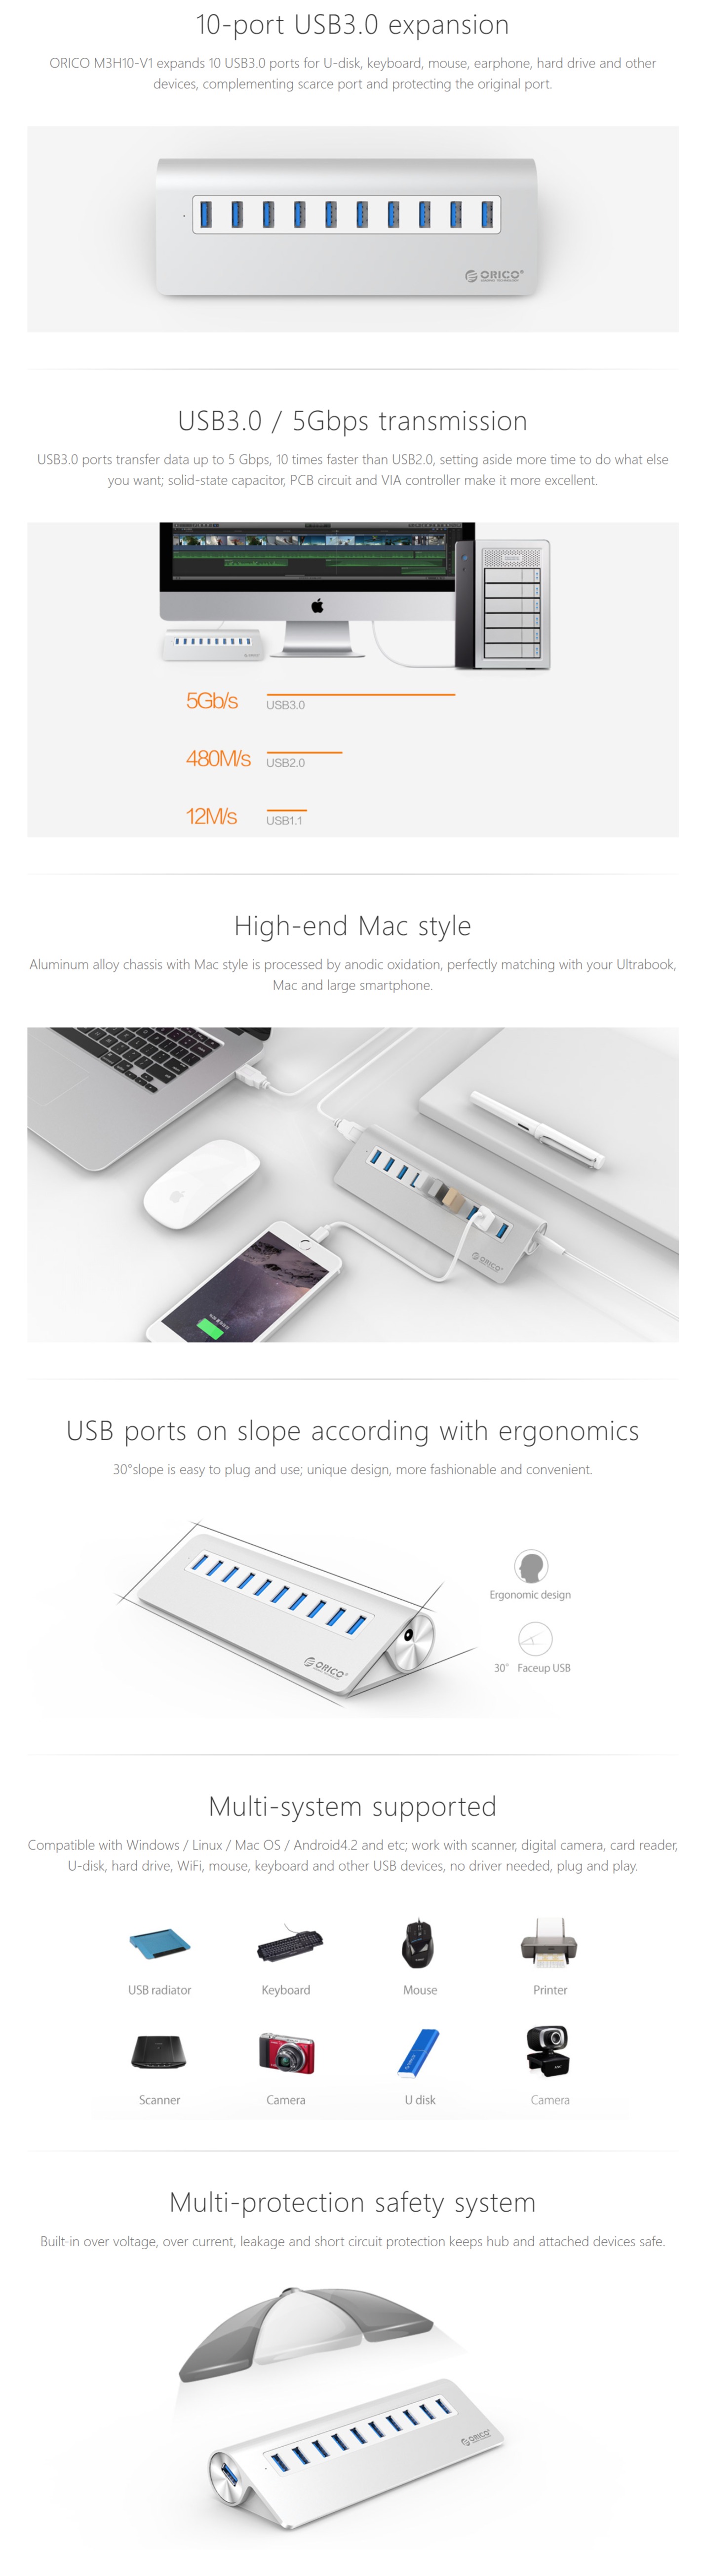 A large marketing image providing additional information about the product ORICO Aluminium 10 Port USB3.0 Hub - Additional alt info not provided